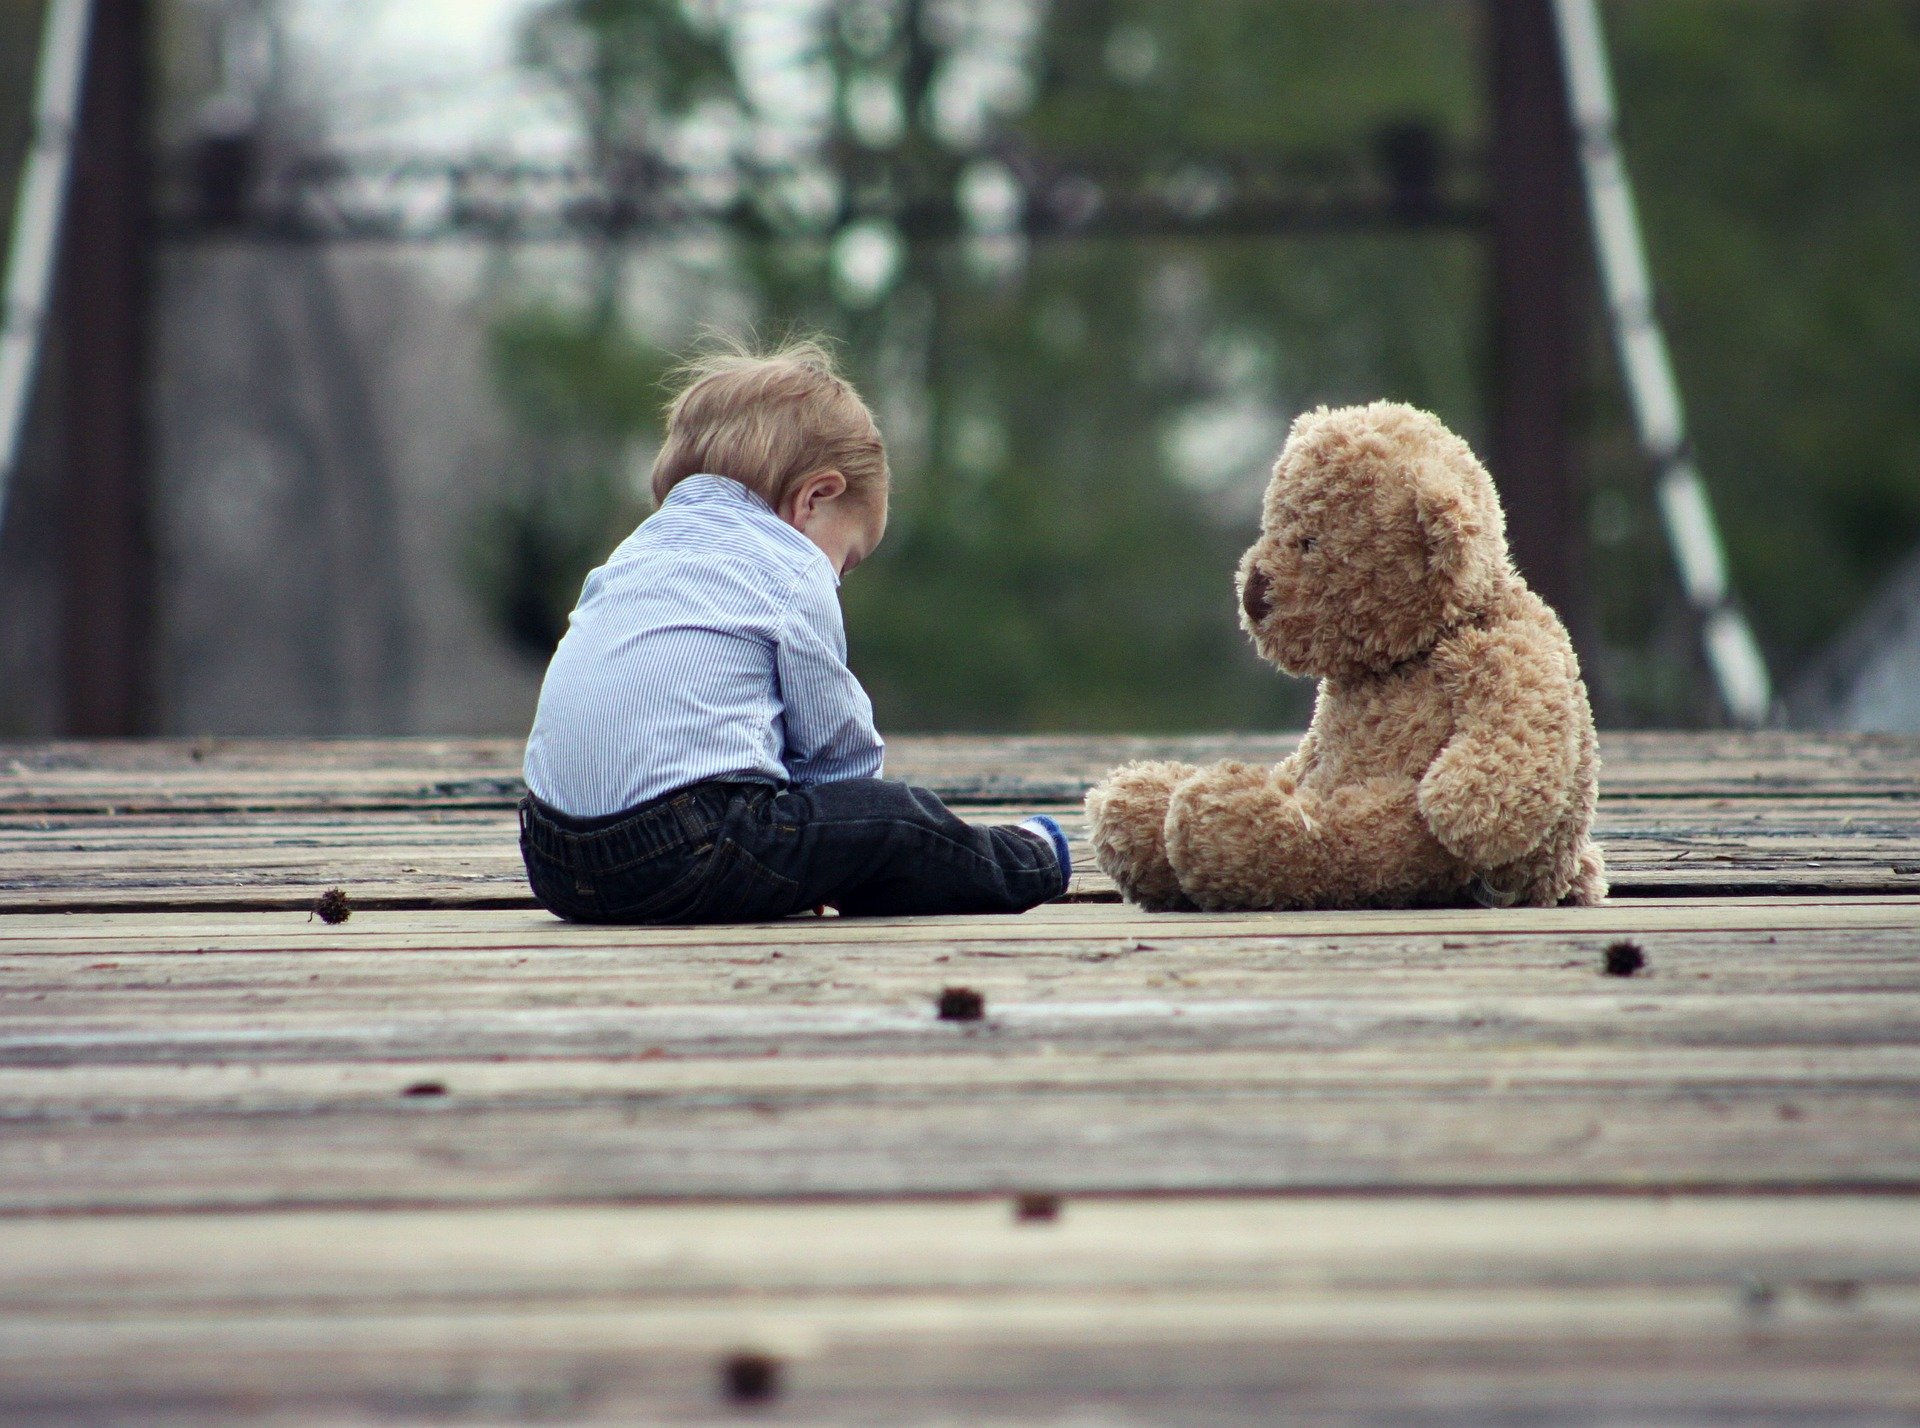 Who is to foster your children when you divorce?